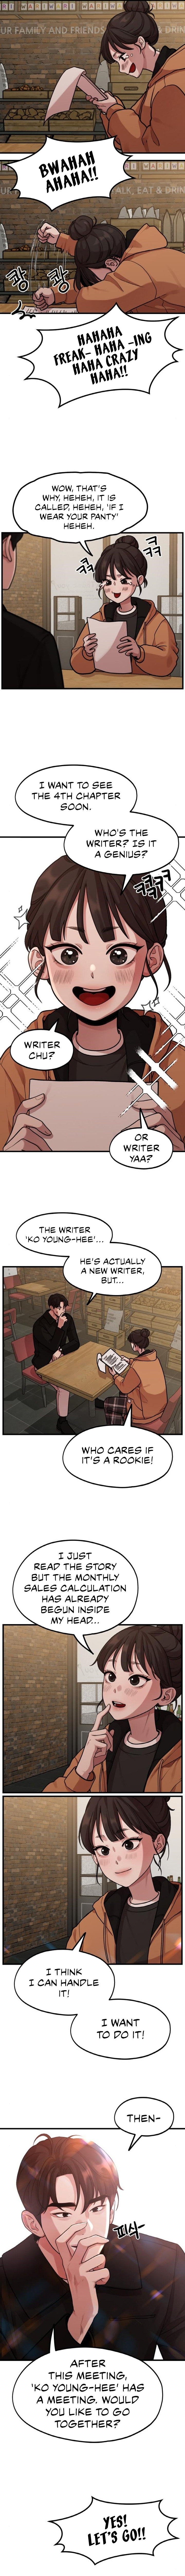 Writer Sung’s Life - Chapter 3 Page 9